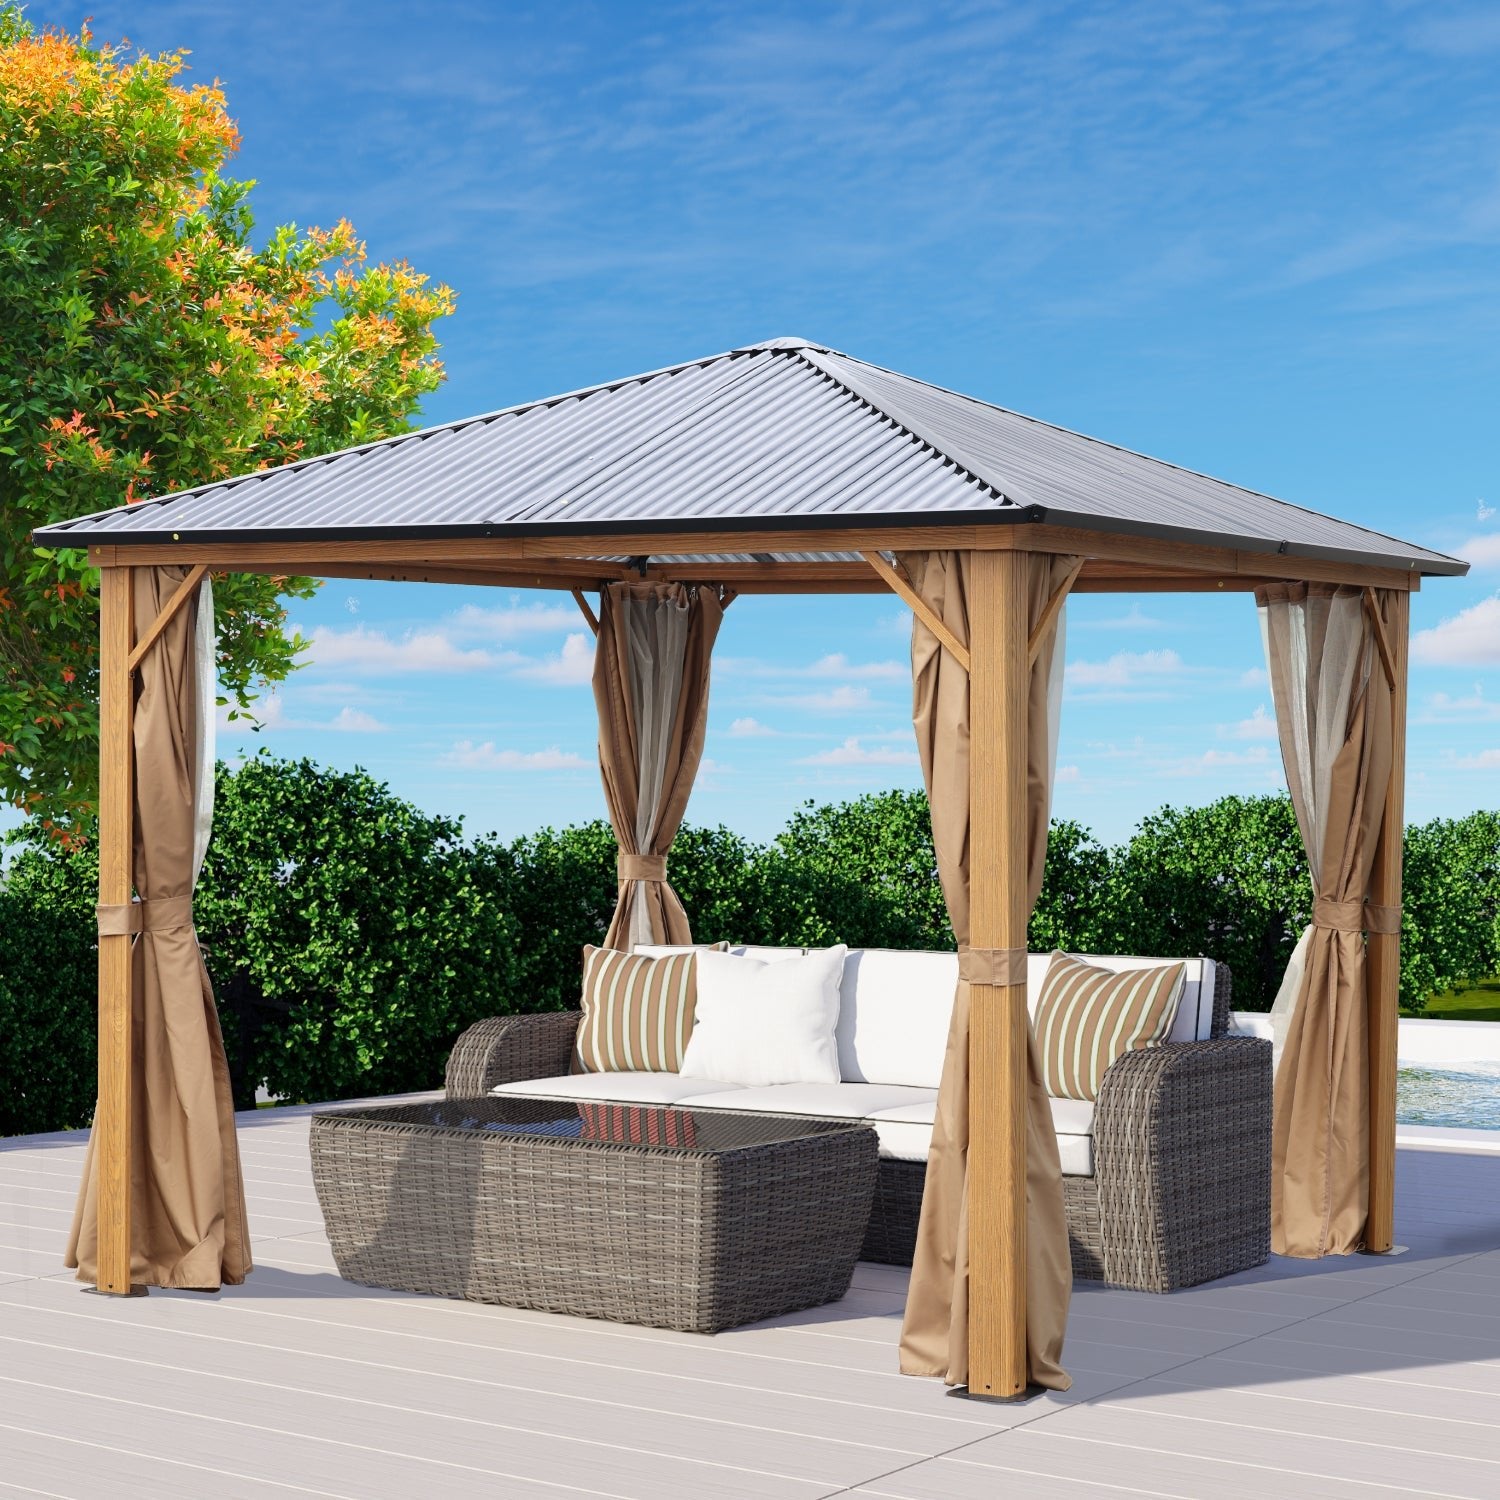 10 x 10 ft. /12 x 10 ft. Wooden Finish Coated Aluminum Frame Gazebo with Polycarbonate Roof, Curtains and Nettings Gazebo Aoodor LLC   